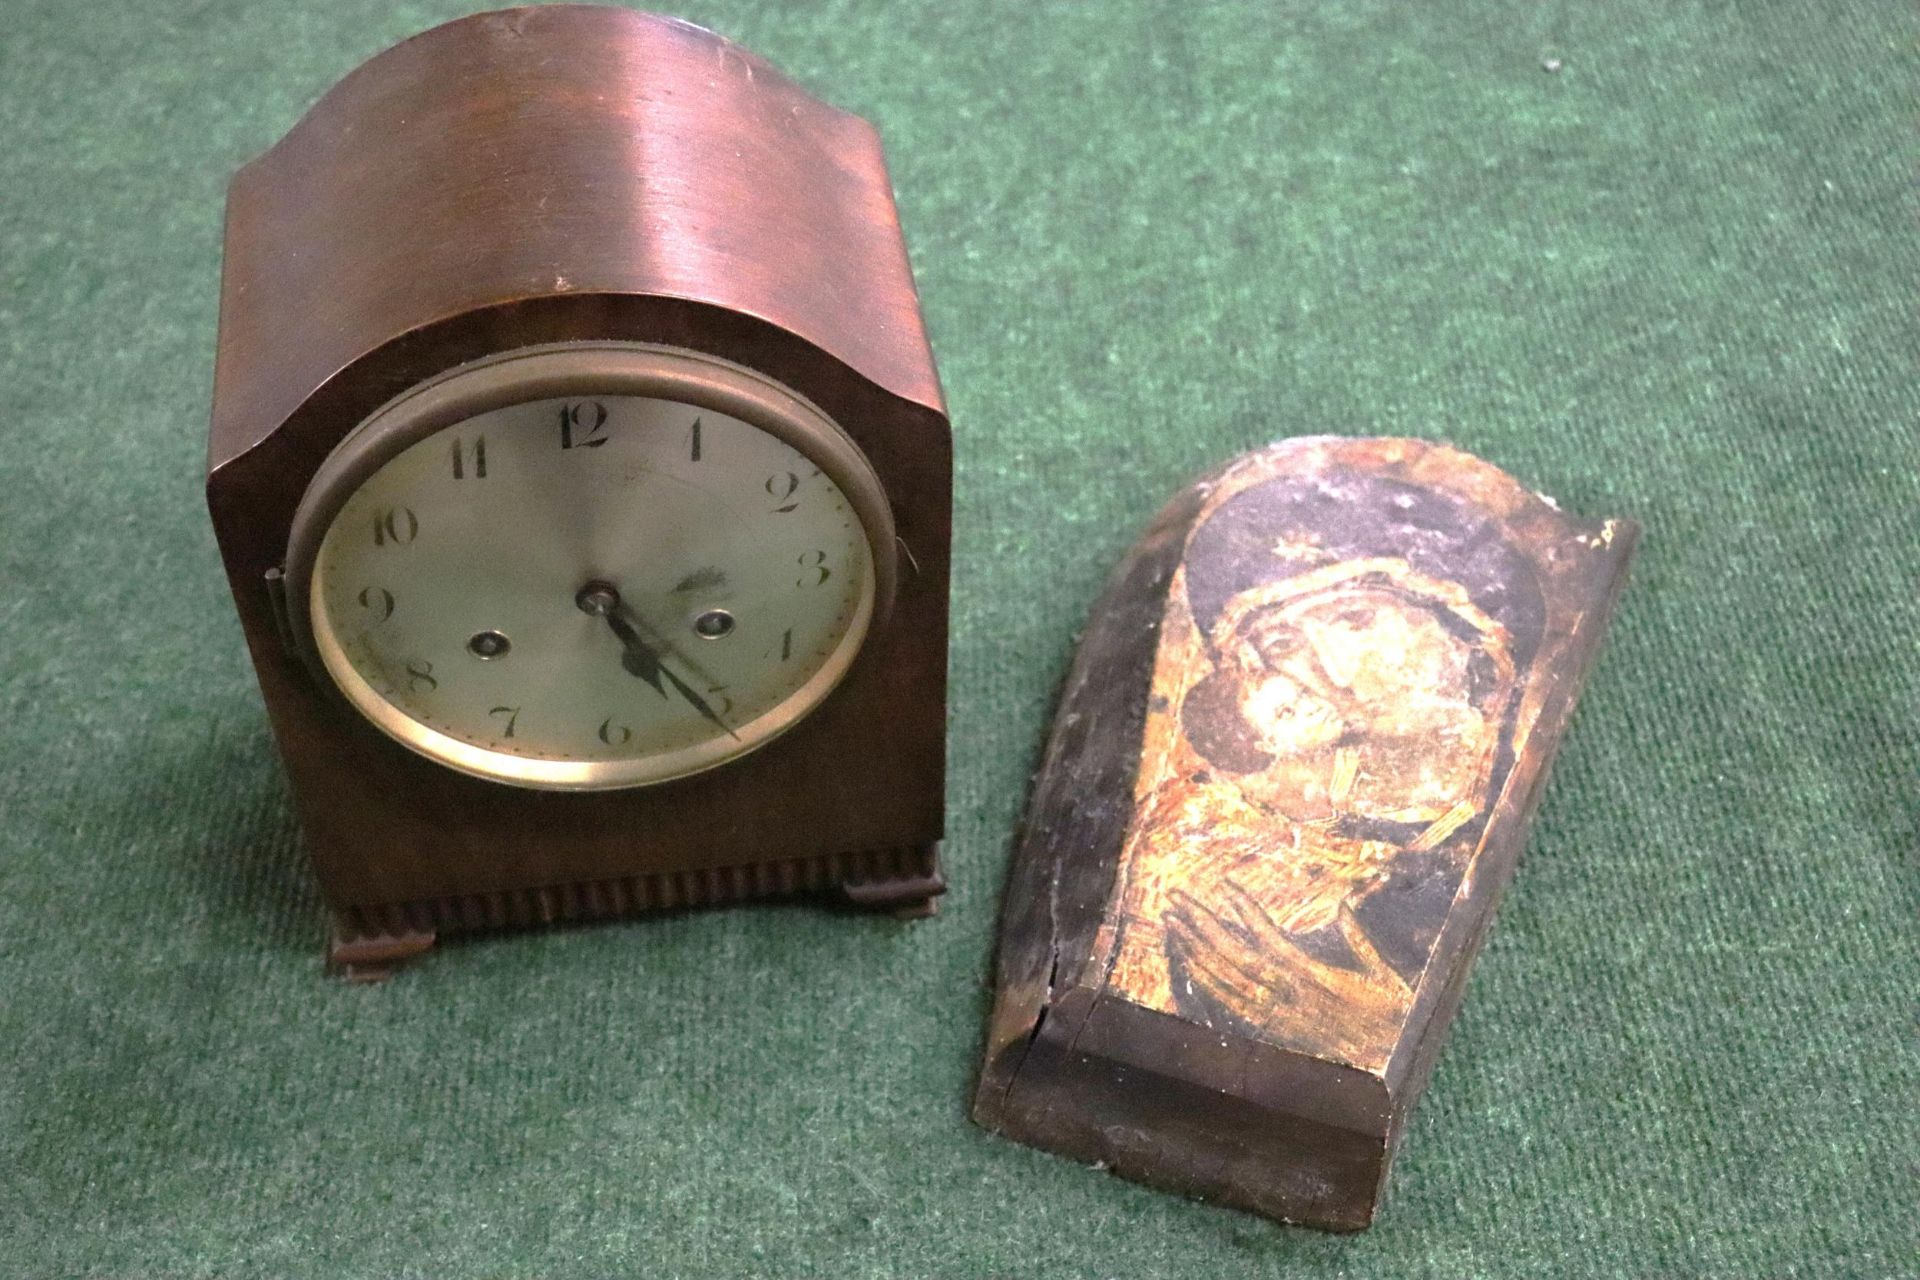 A VINTAGE MAHOGANY CASED MANTLE CLOCK WITH PENDULUM PLUS A VINTAGE PAINTING OF MARY AND JESUS ON